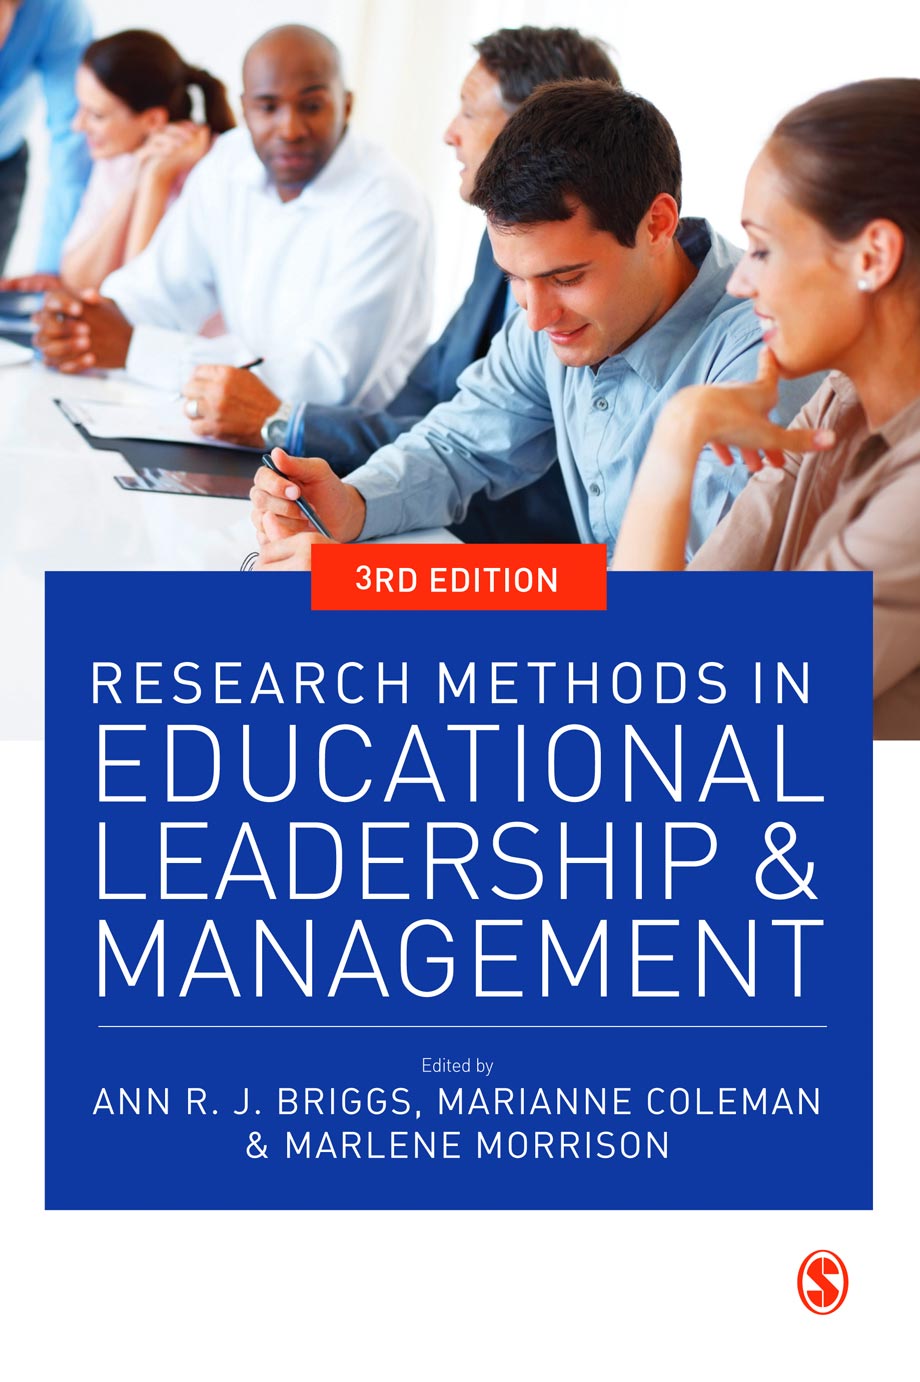 Research Methods in Educational Leadership and Management - Ann R J Briggs, Marianne Coleman, Marlene Morrison